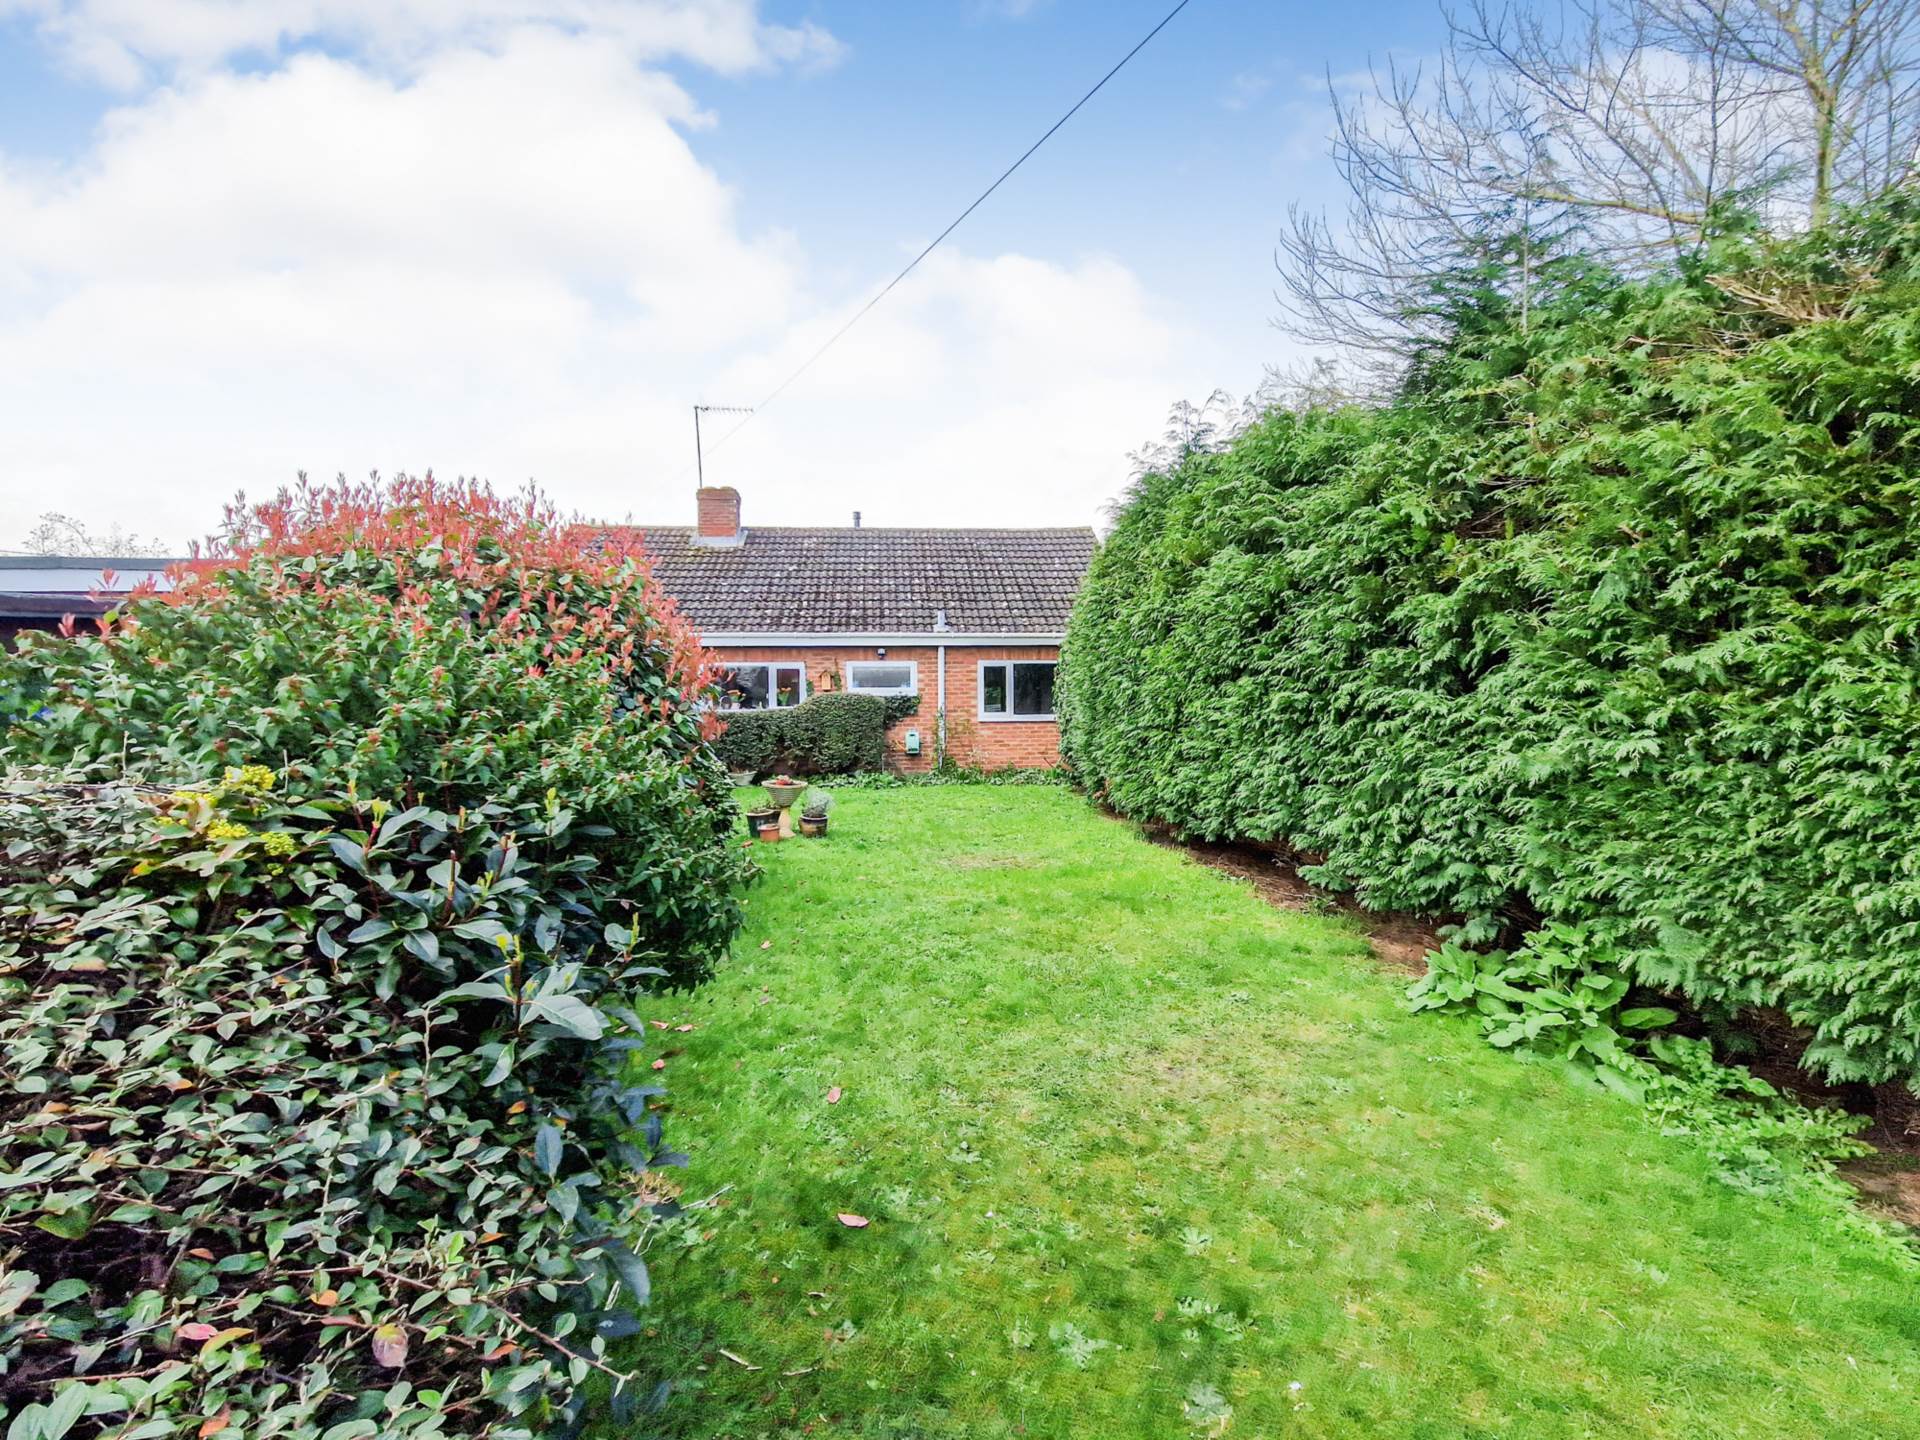 Rectory Road, Upton Upon Severn, Worcestershire, Image 13